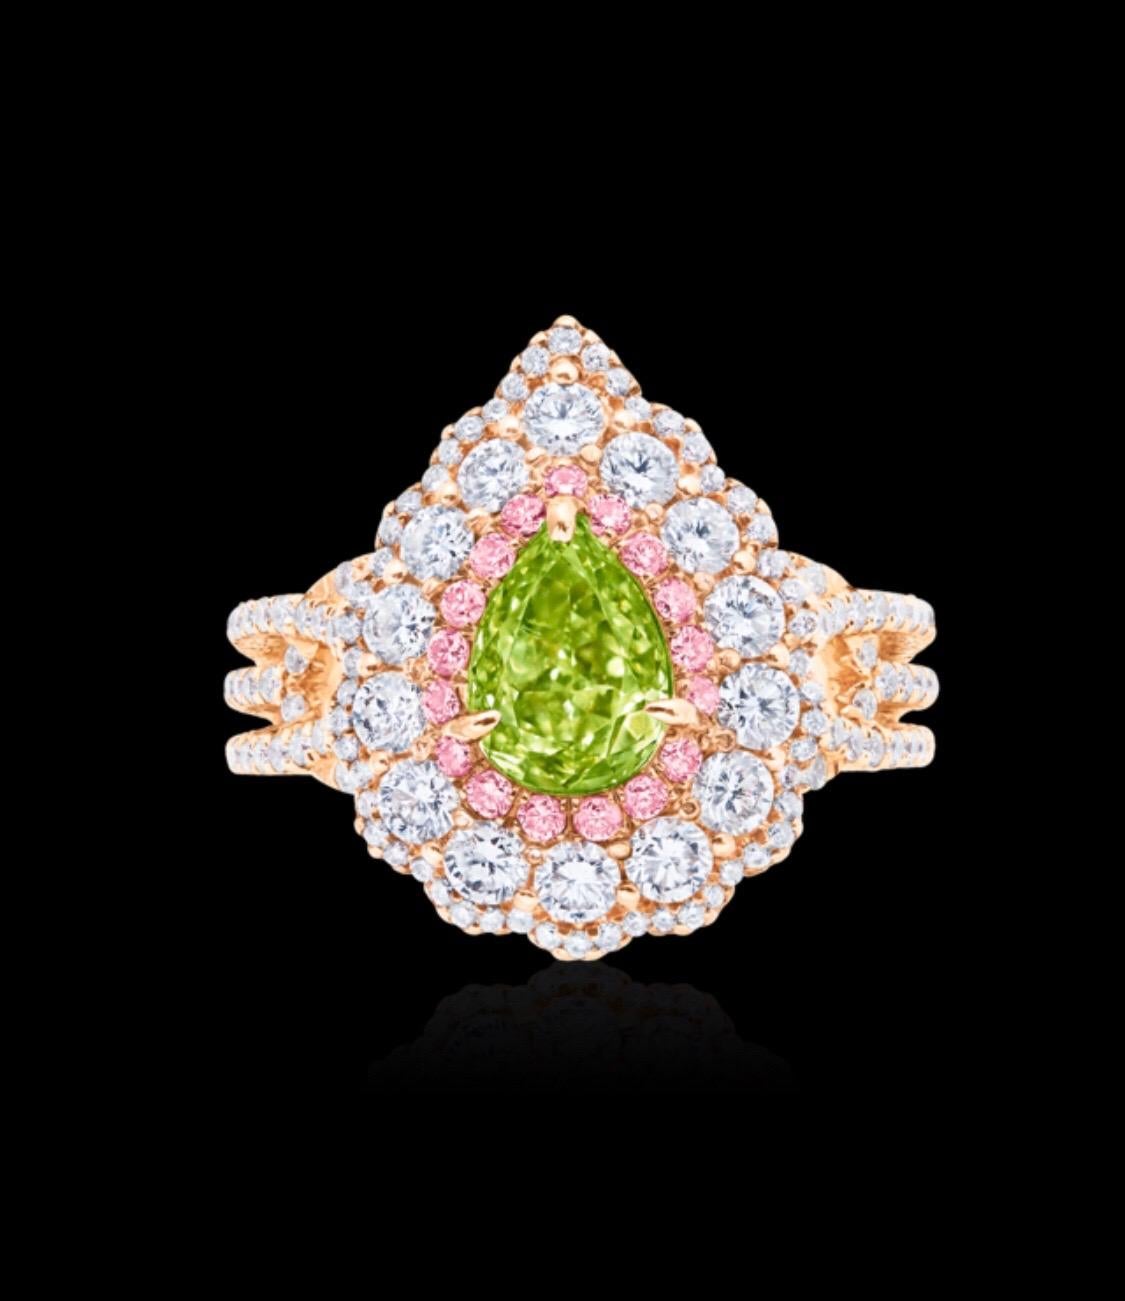 Showcasing a very special certified 1 carat clean natural fancy yellow green diamond ring certified by GIA. Because the second word is green on the certificate that means the primary color is indeed Green, and yellow is just an overtone. Hand made